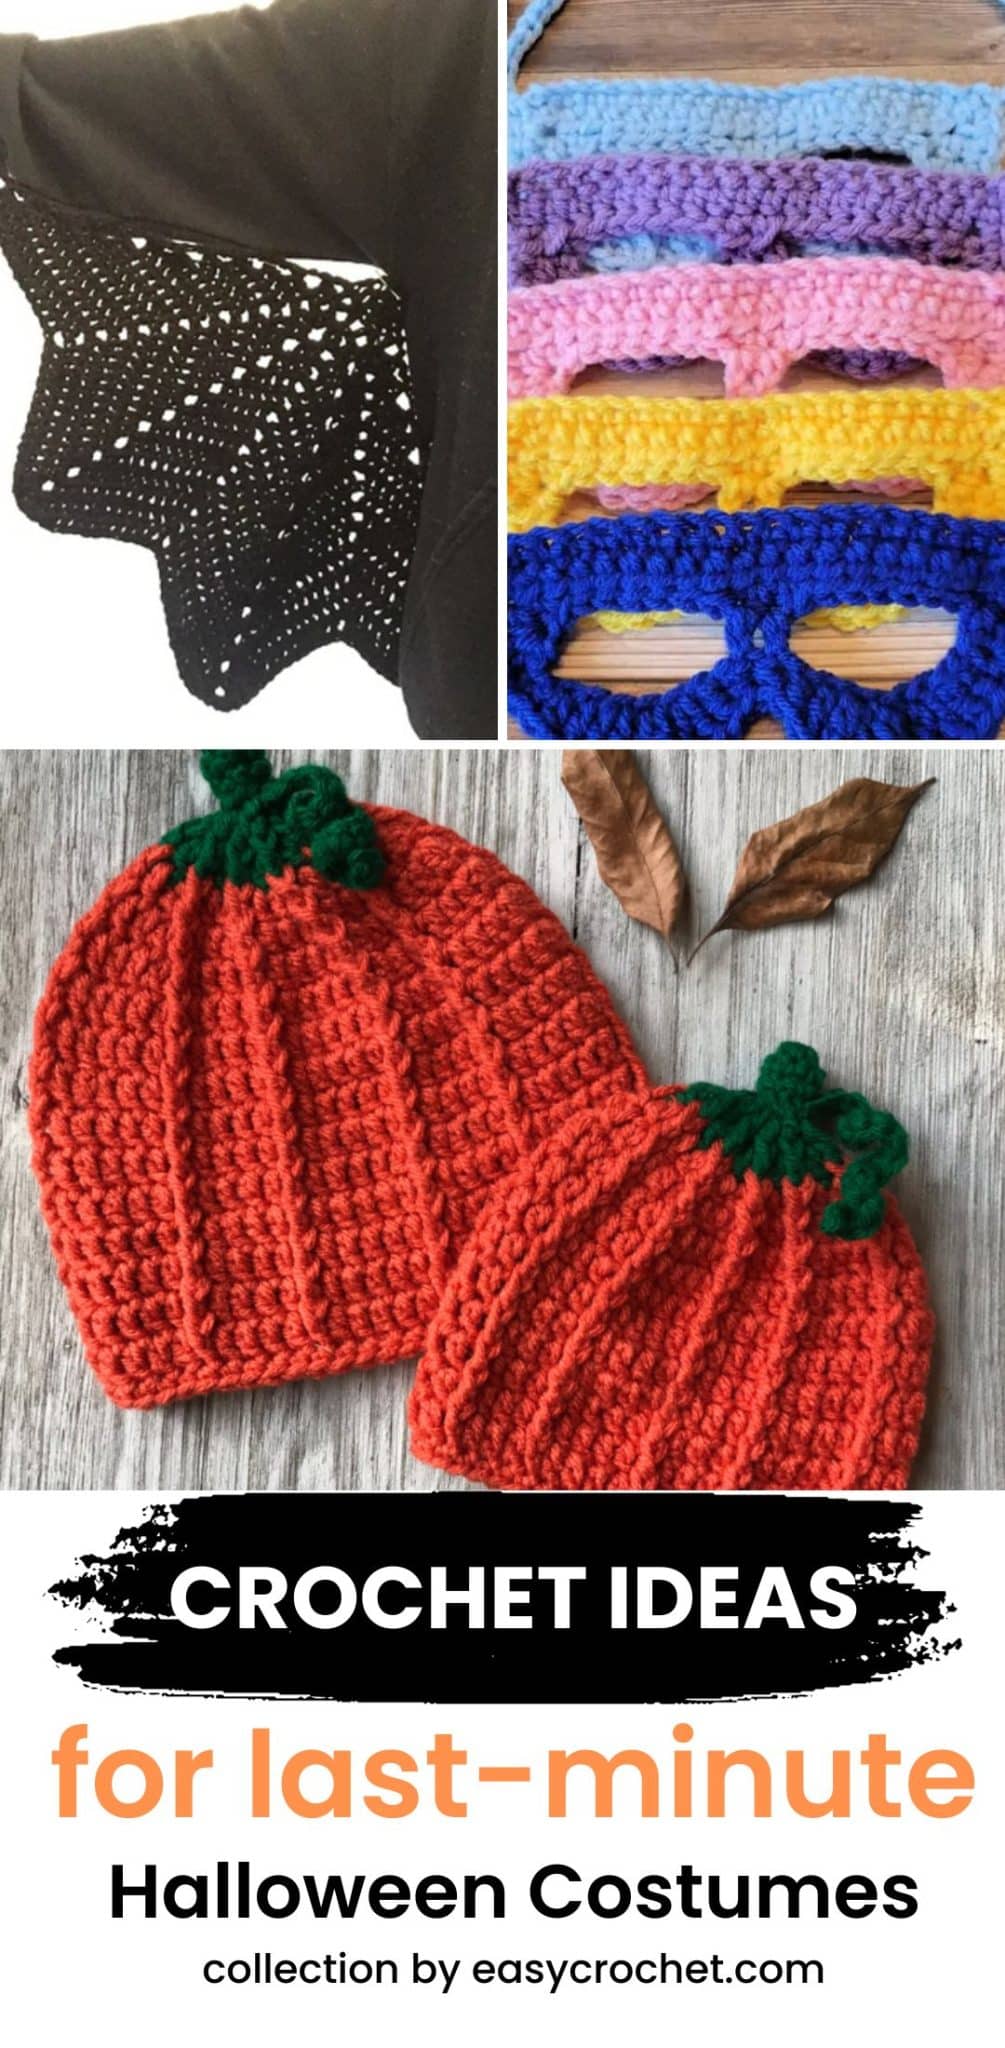 halloween costumes to crochet that are great for last minute ideas